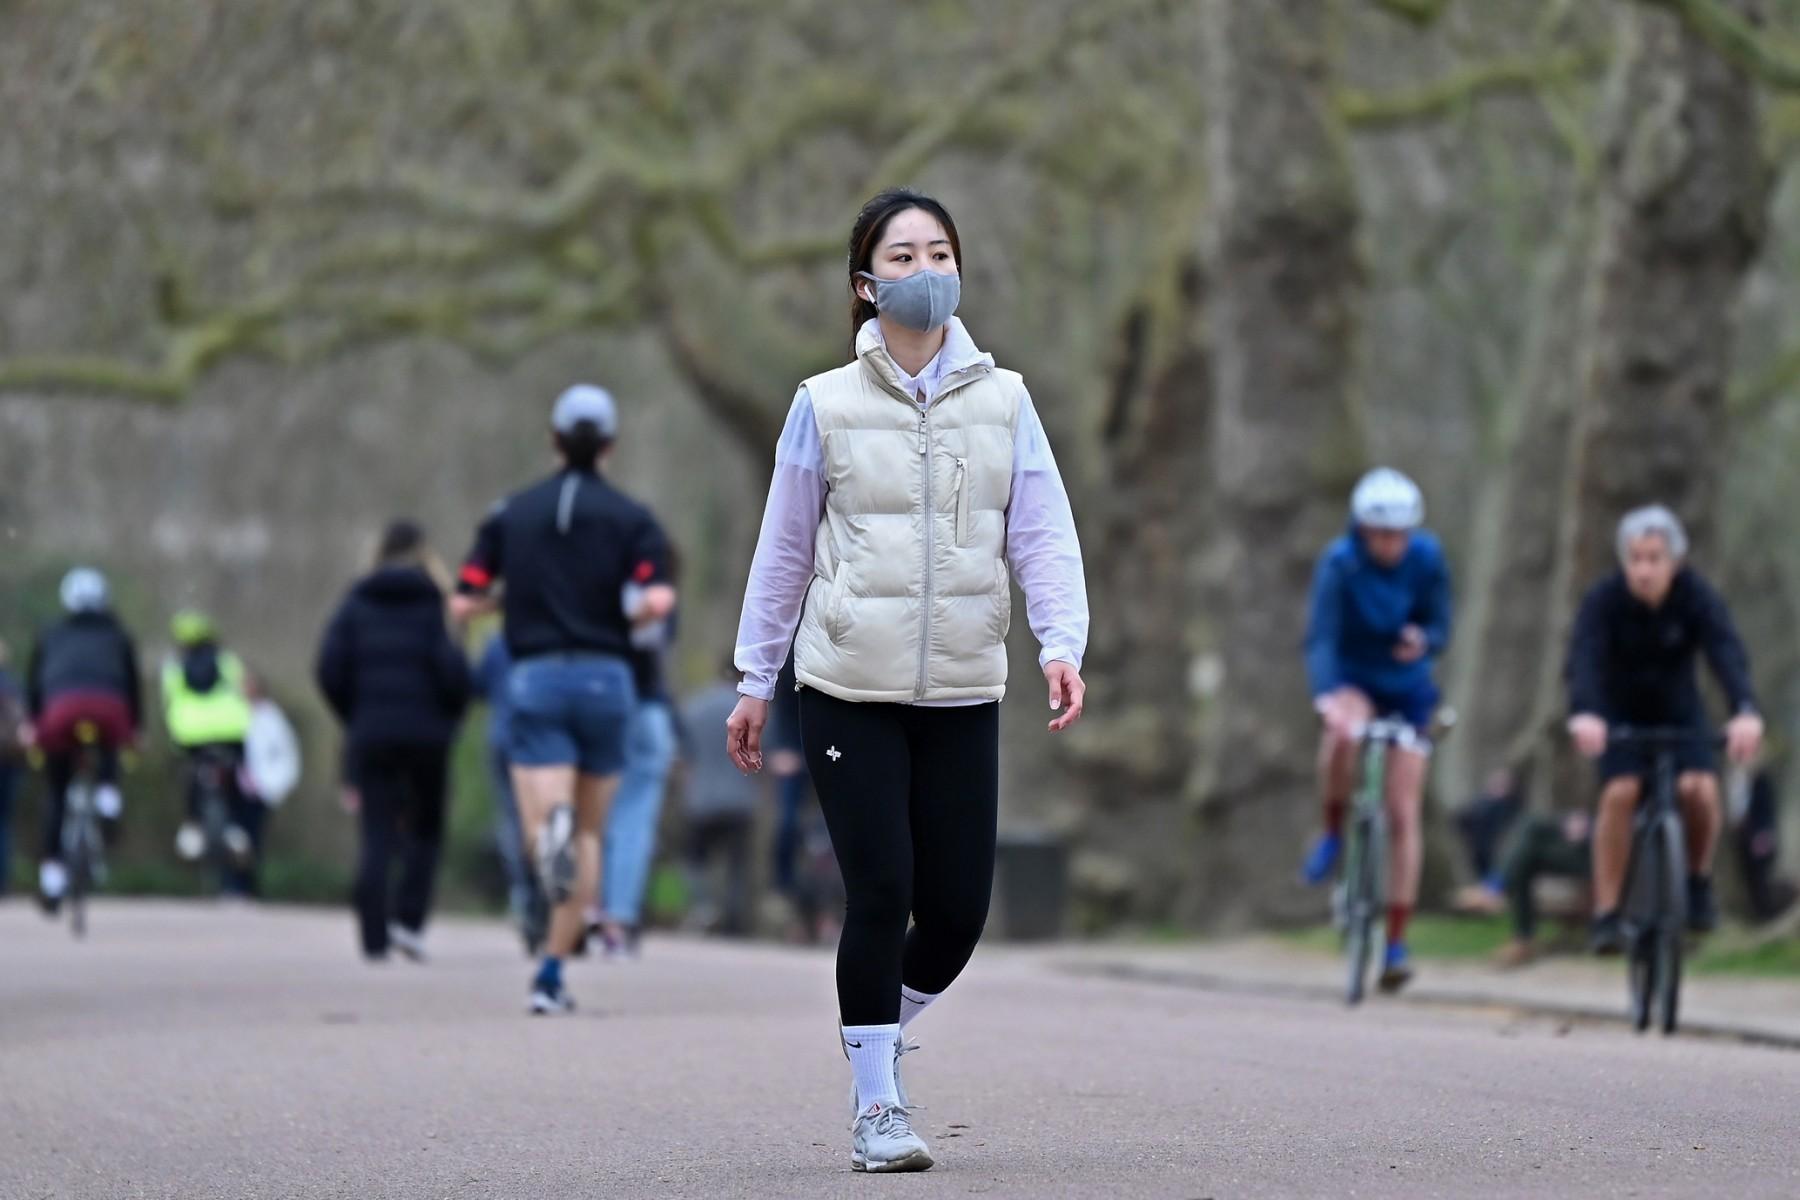 A woman wearing a protective face covering to combat the spread of Covid-19, takes her daily exercise in Battersea Park in London on March 28, 2021. Photo: AFP